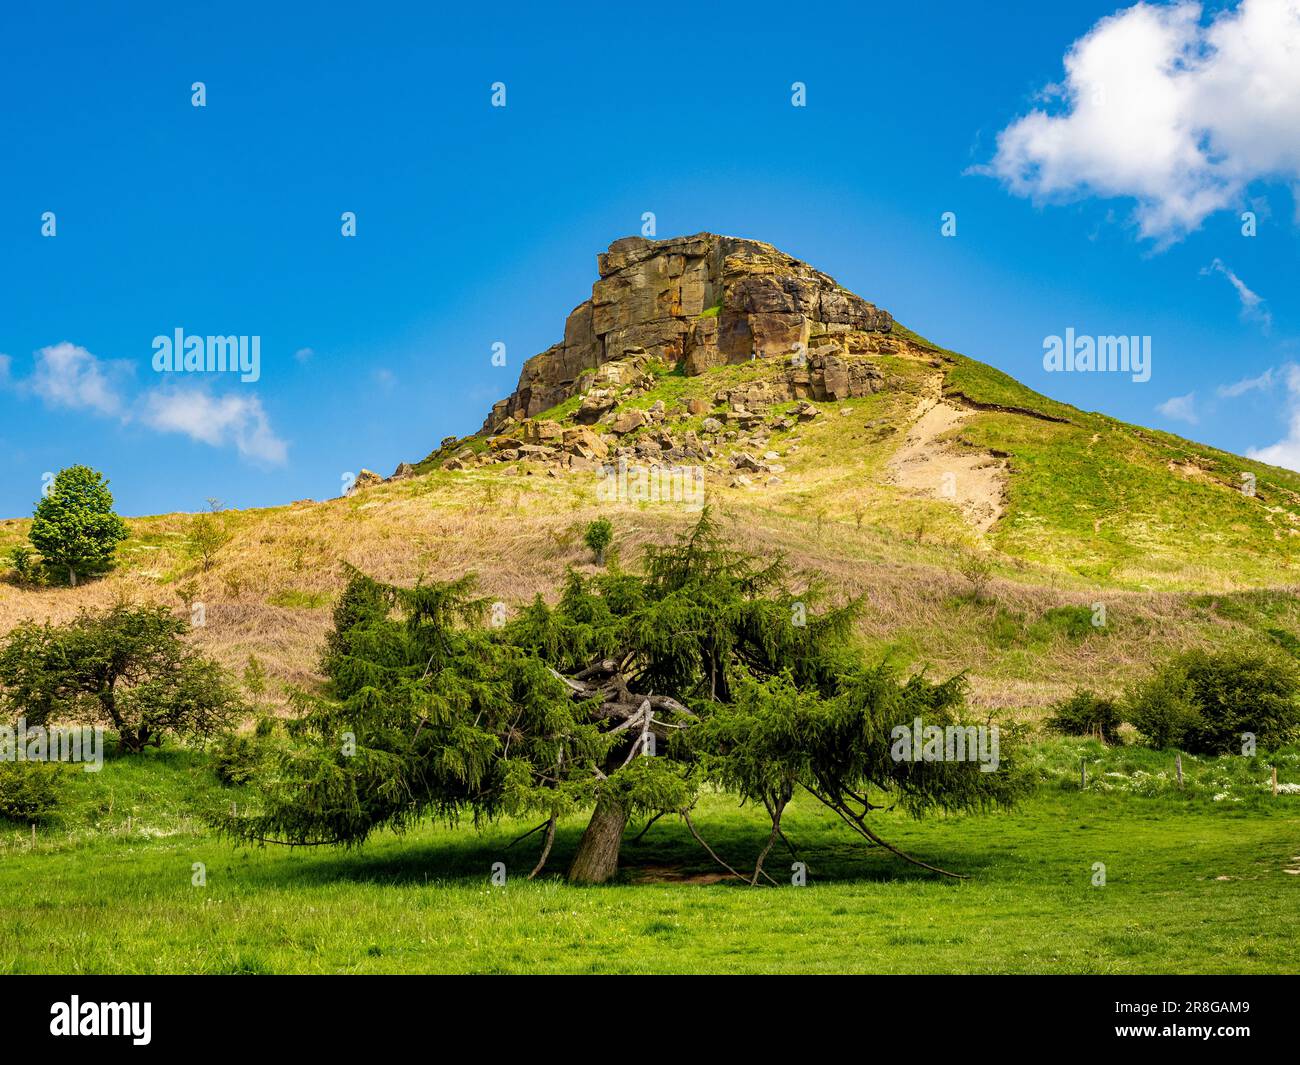 The iconic shape of Roseberry Topping seen with an old coniferous tree in the foreground. Stock Photo